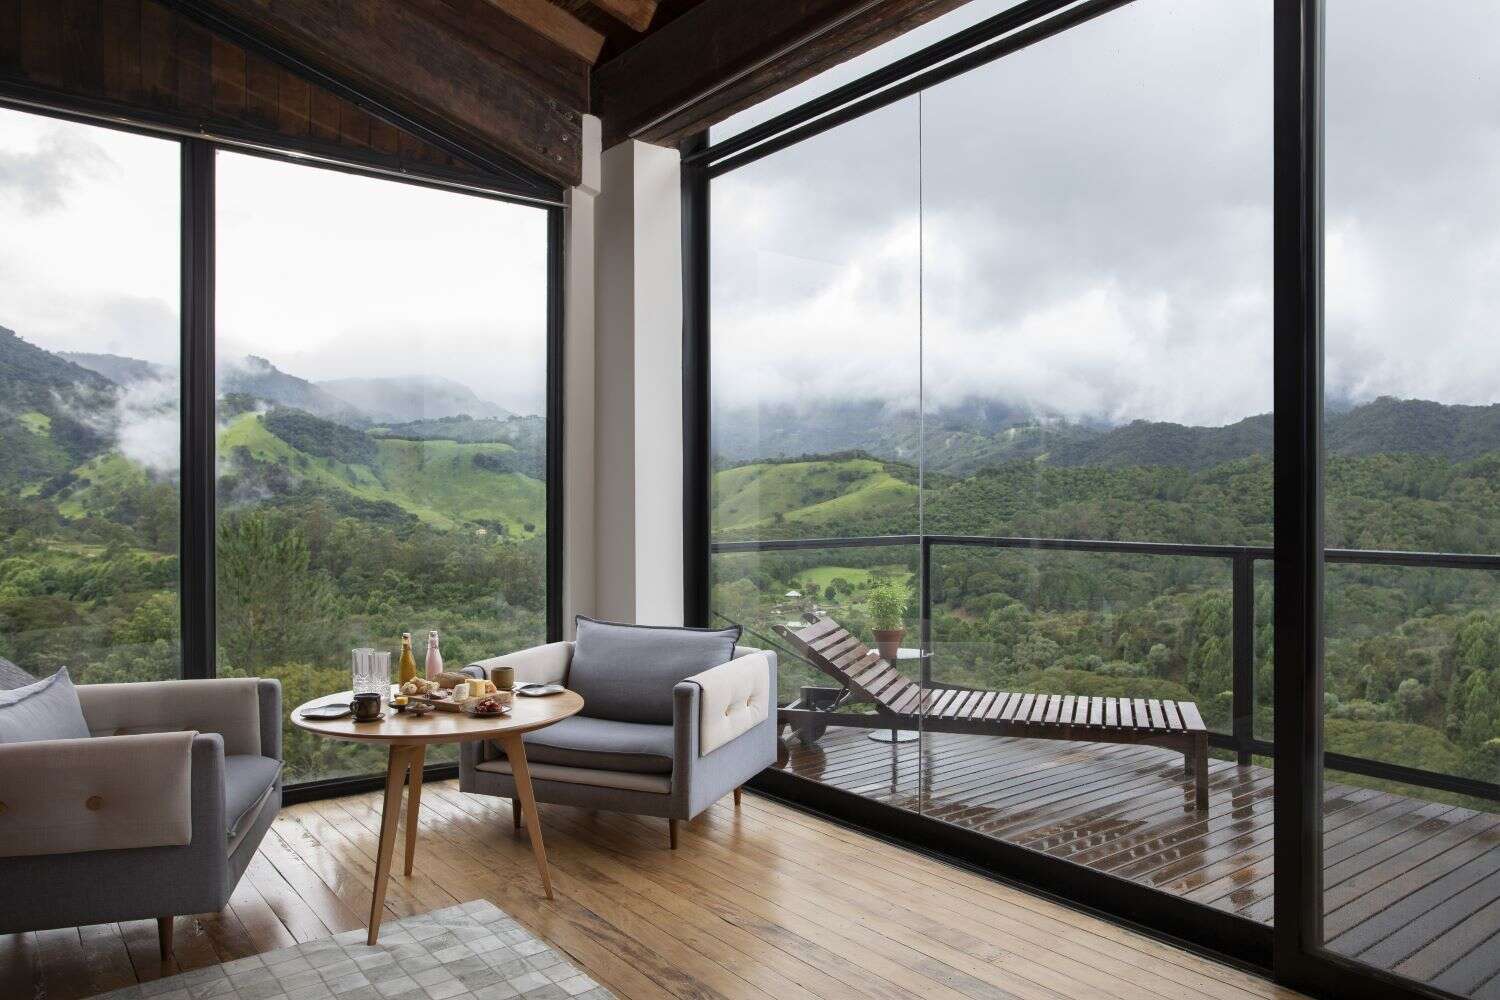 Panorama Suite with views overlooking the green lush mountain lanscape